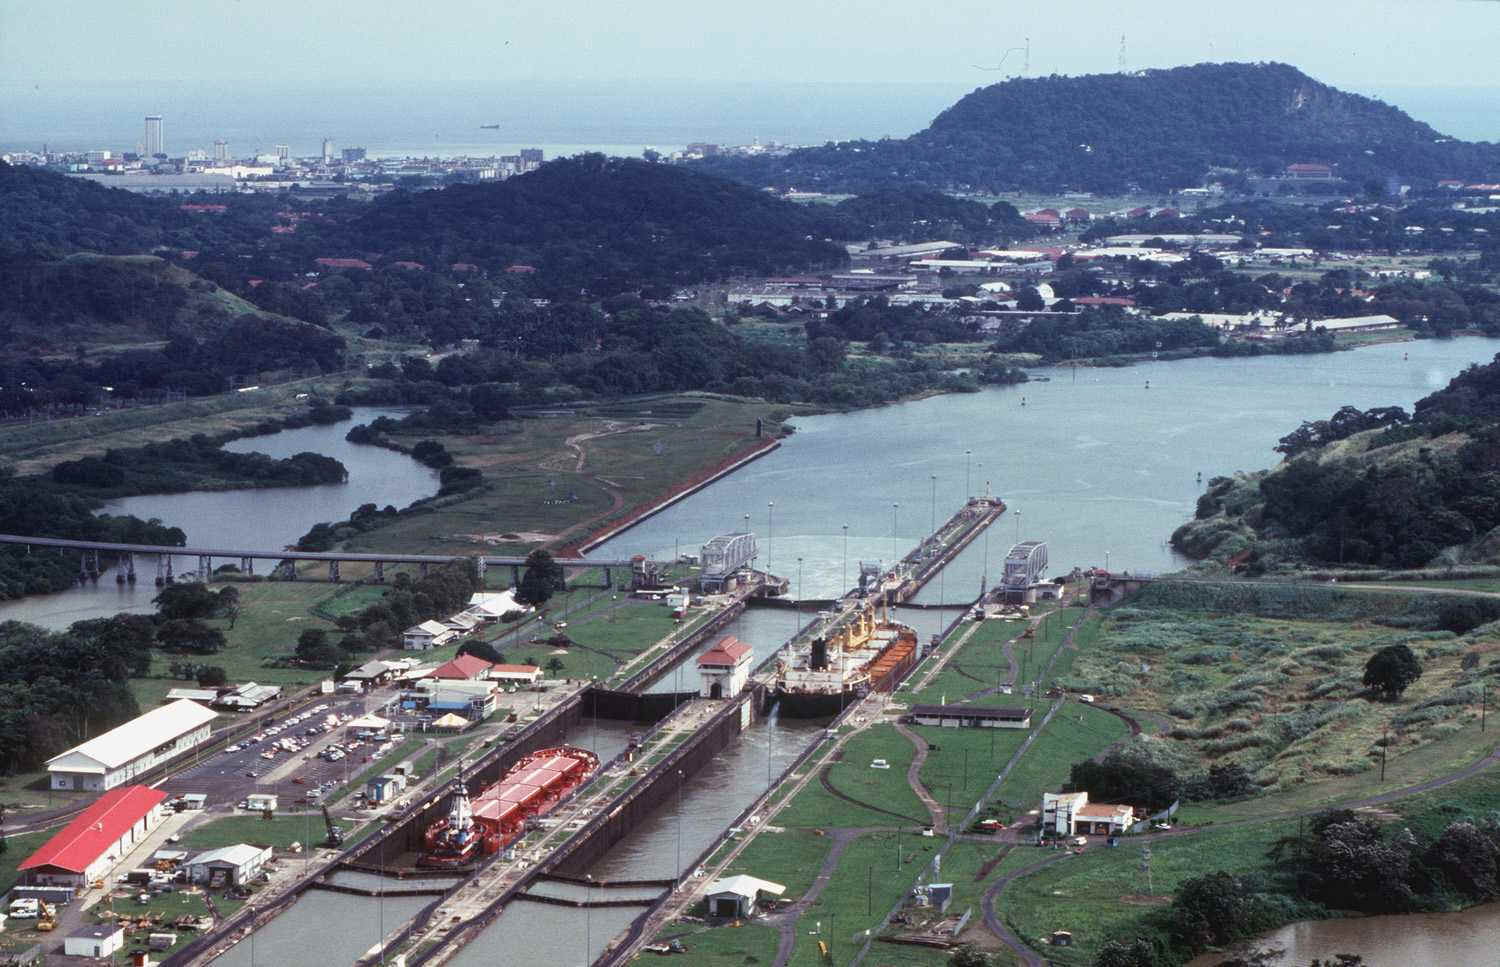 Panama Canal's Miraflores Locks (before 2000), the first set of locks for ships entering the Canal from the Pacific -- Albrook area and Ancon Hill in the right background; part of Panama City in distant left background [Photo courtesy of Panama Canal Authority from its website, www.pancanal.com]